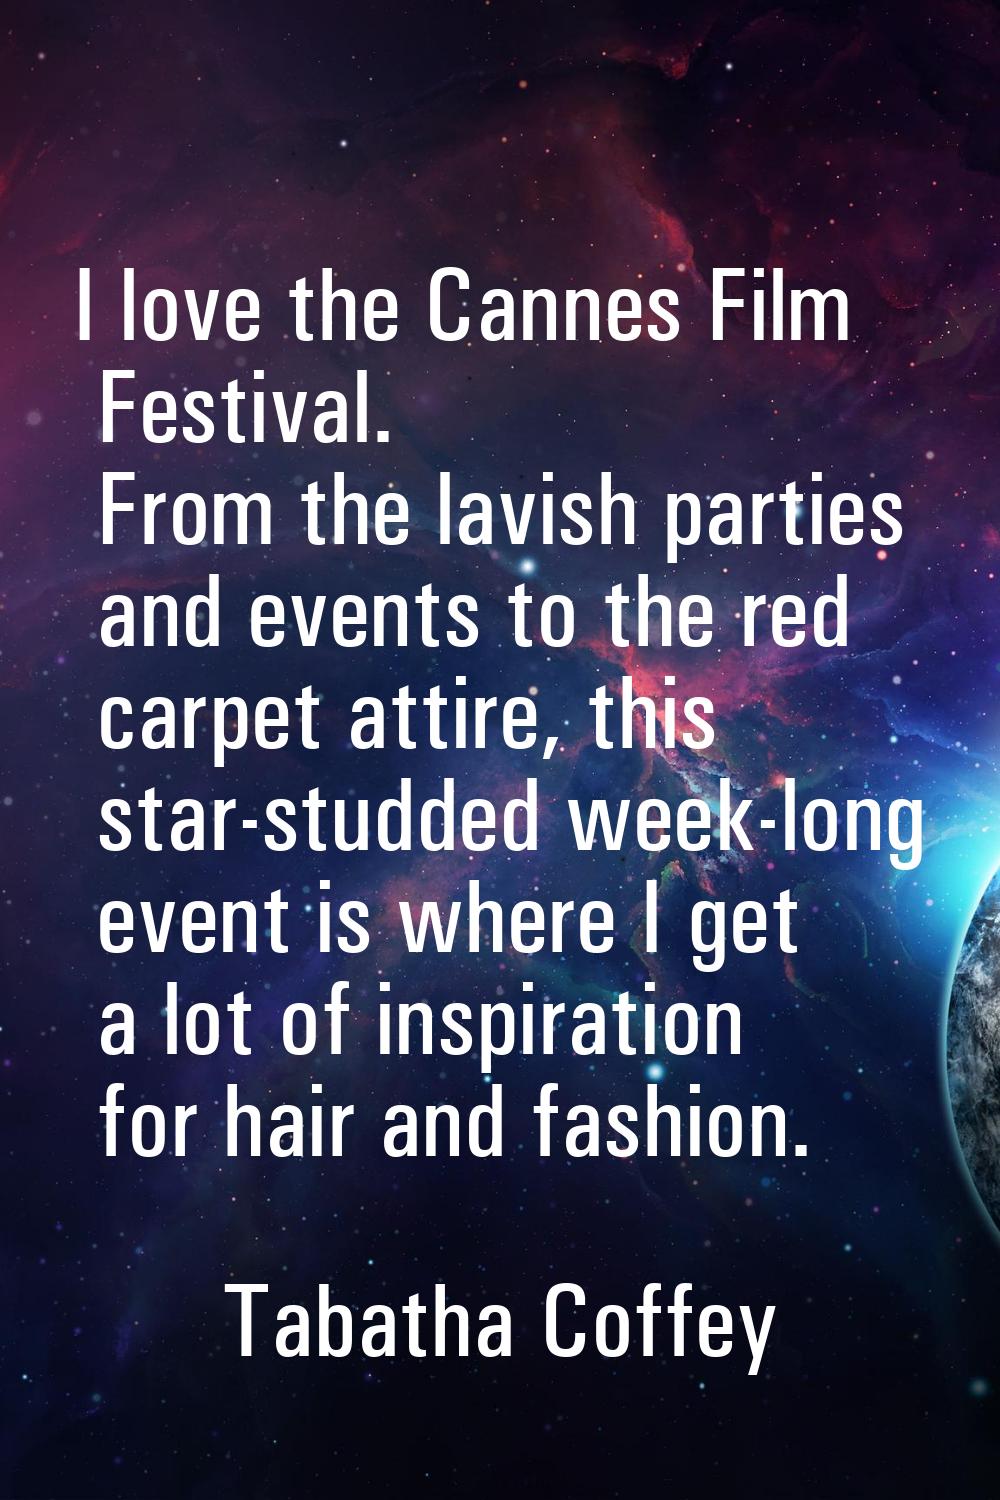 I love the Cannes Film Festival. From the lavish parties and events to the red carpet attire, this 